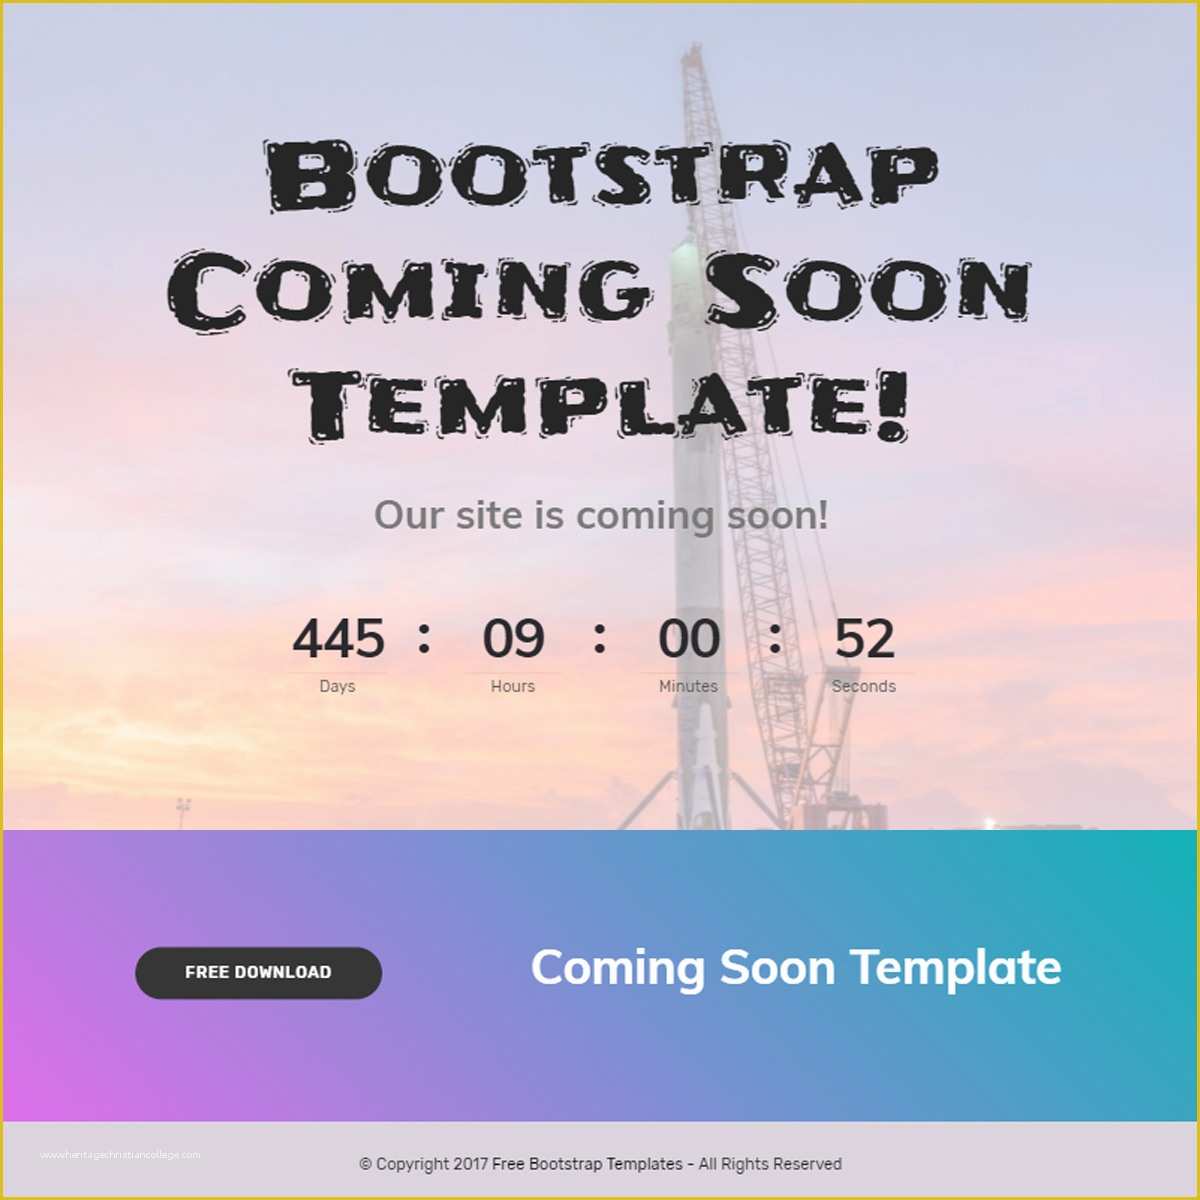 Free Bootstrap Templates 2017 Of 33 Awesome Free HTML5 Bootstrap Templates 2018